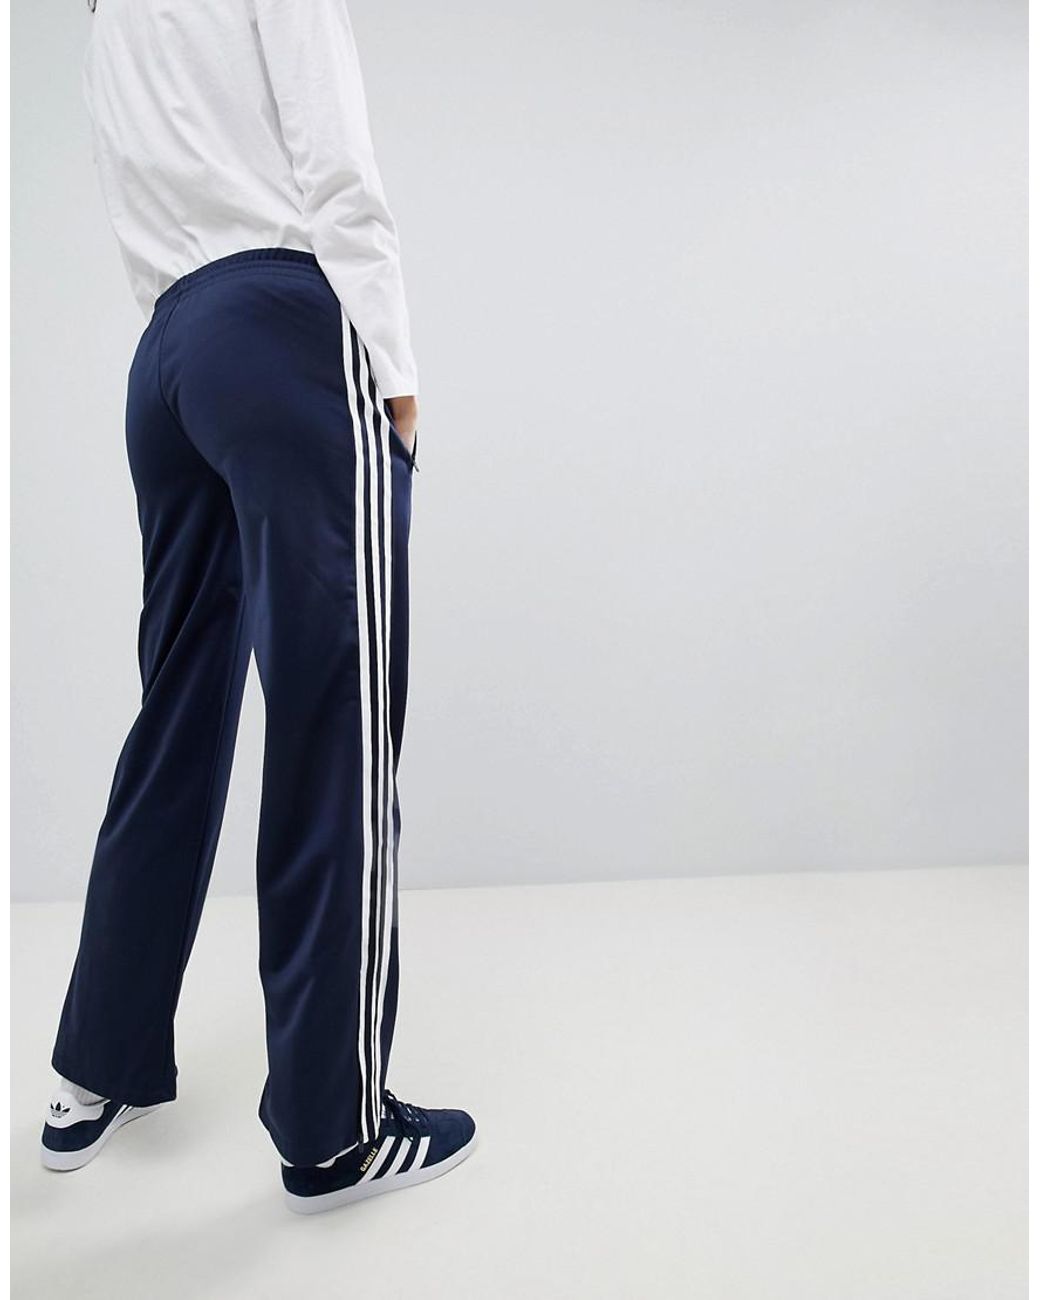 Adidas Vintage Navy Track Pants Baggy Tracksuit Bottoms Trousers